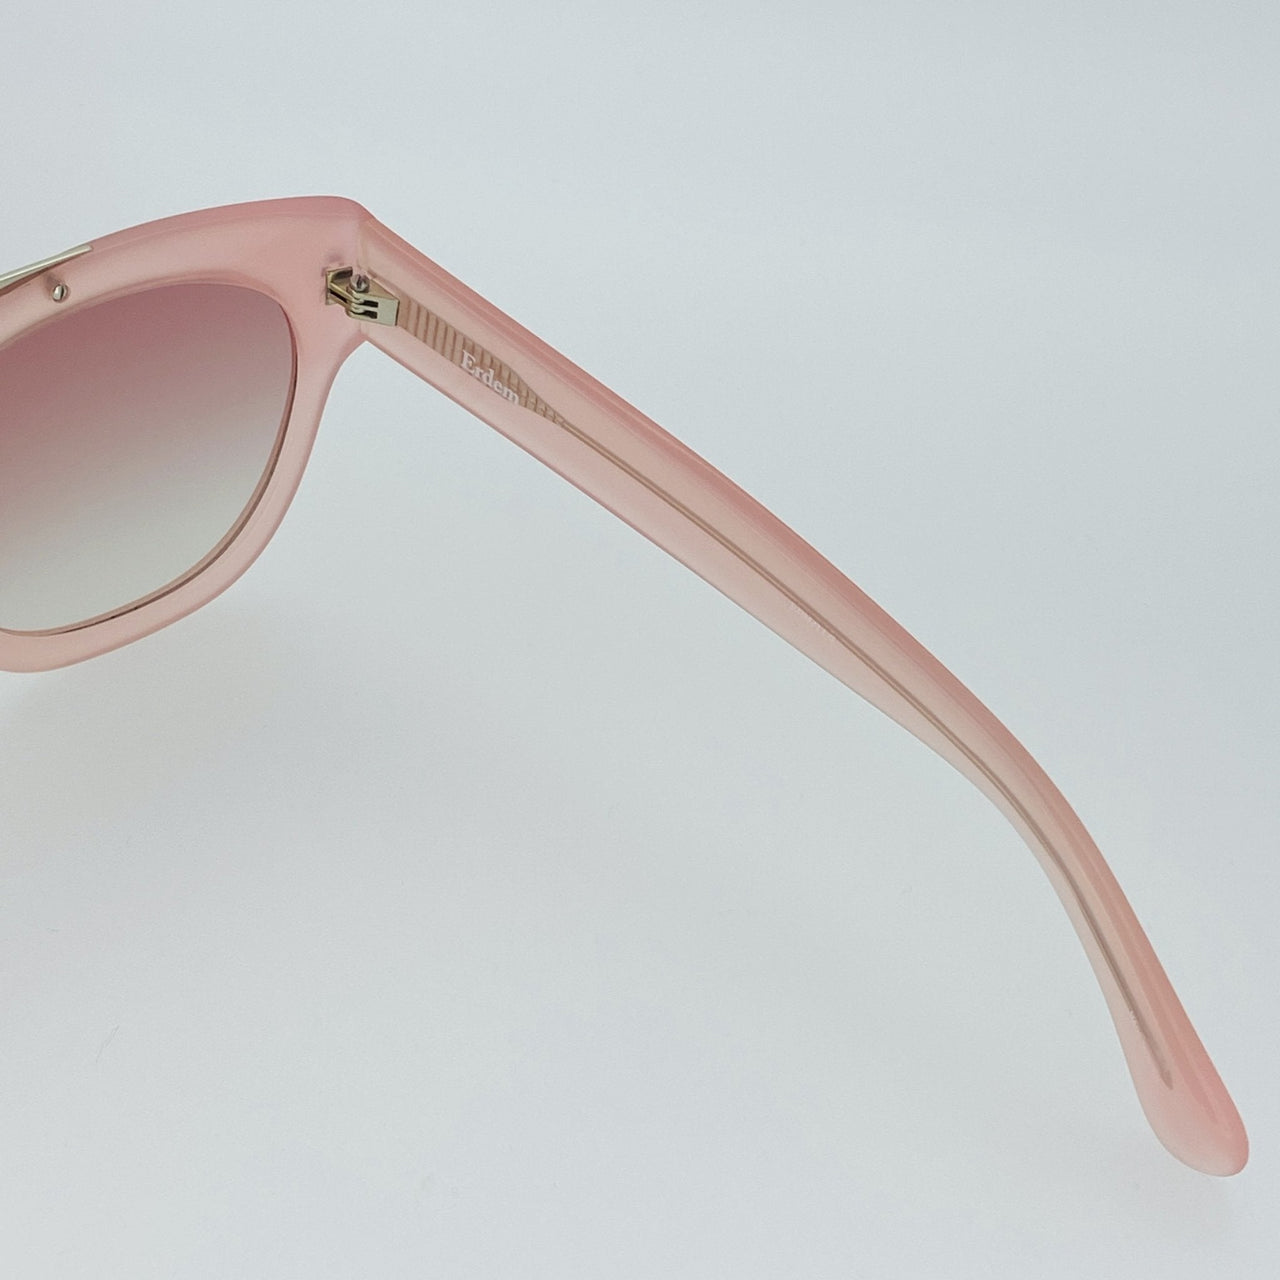 Erdem Women Sunglasses D-Frame Pale Pink with Rose Graduated Lenses EDM11C5SUN - Watches & Crystals